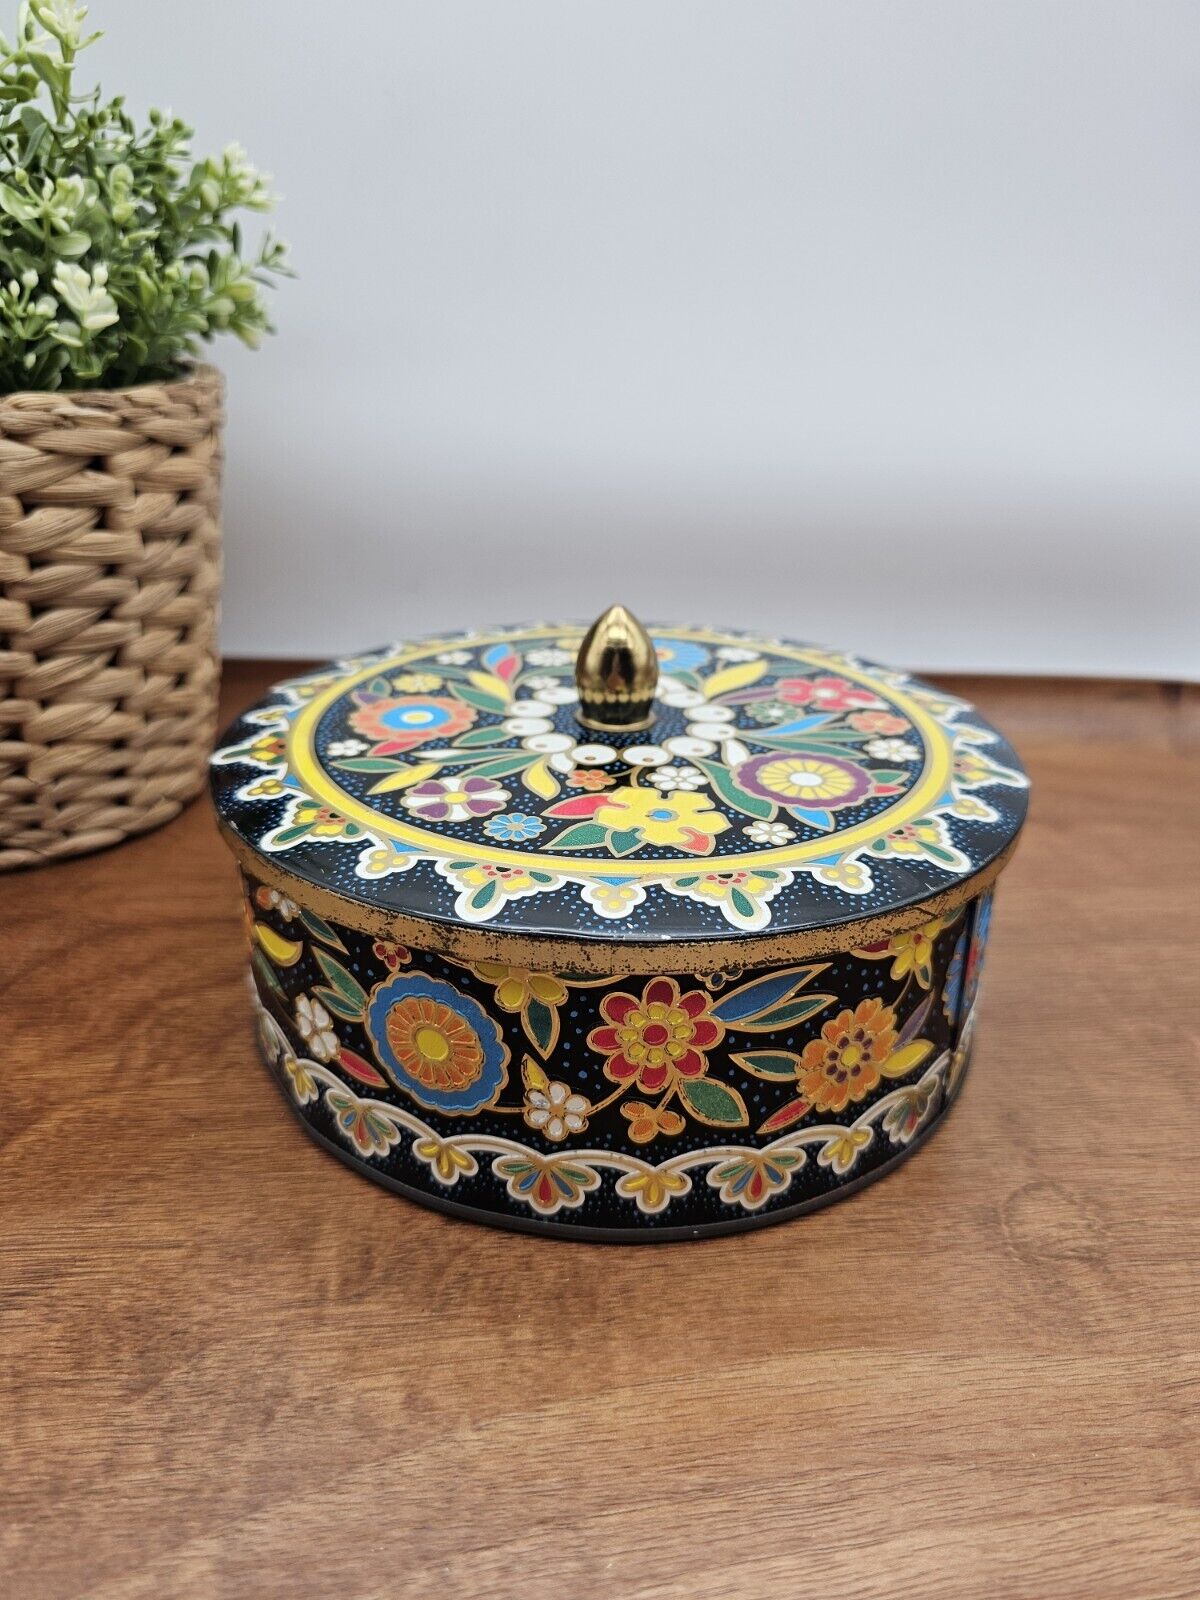 Vintage Daher England Covered Biscuit Candy Tin Canister Colorful Floral Design